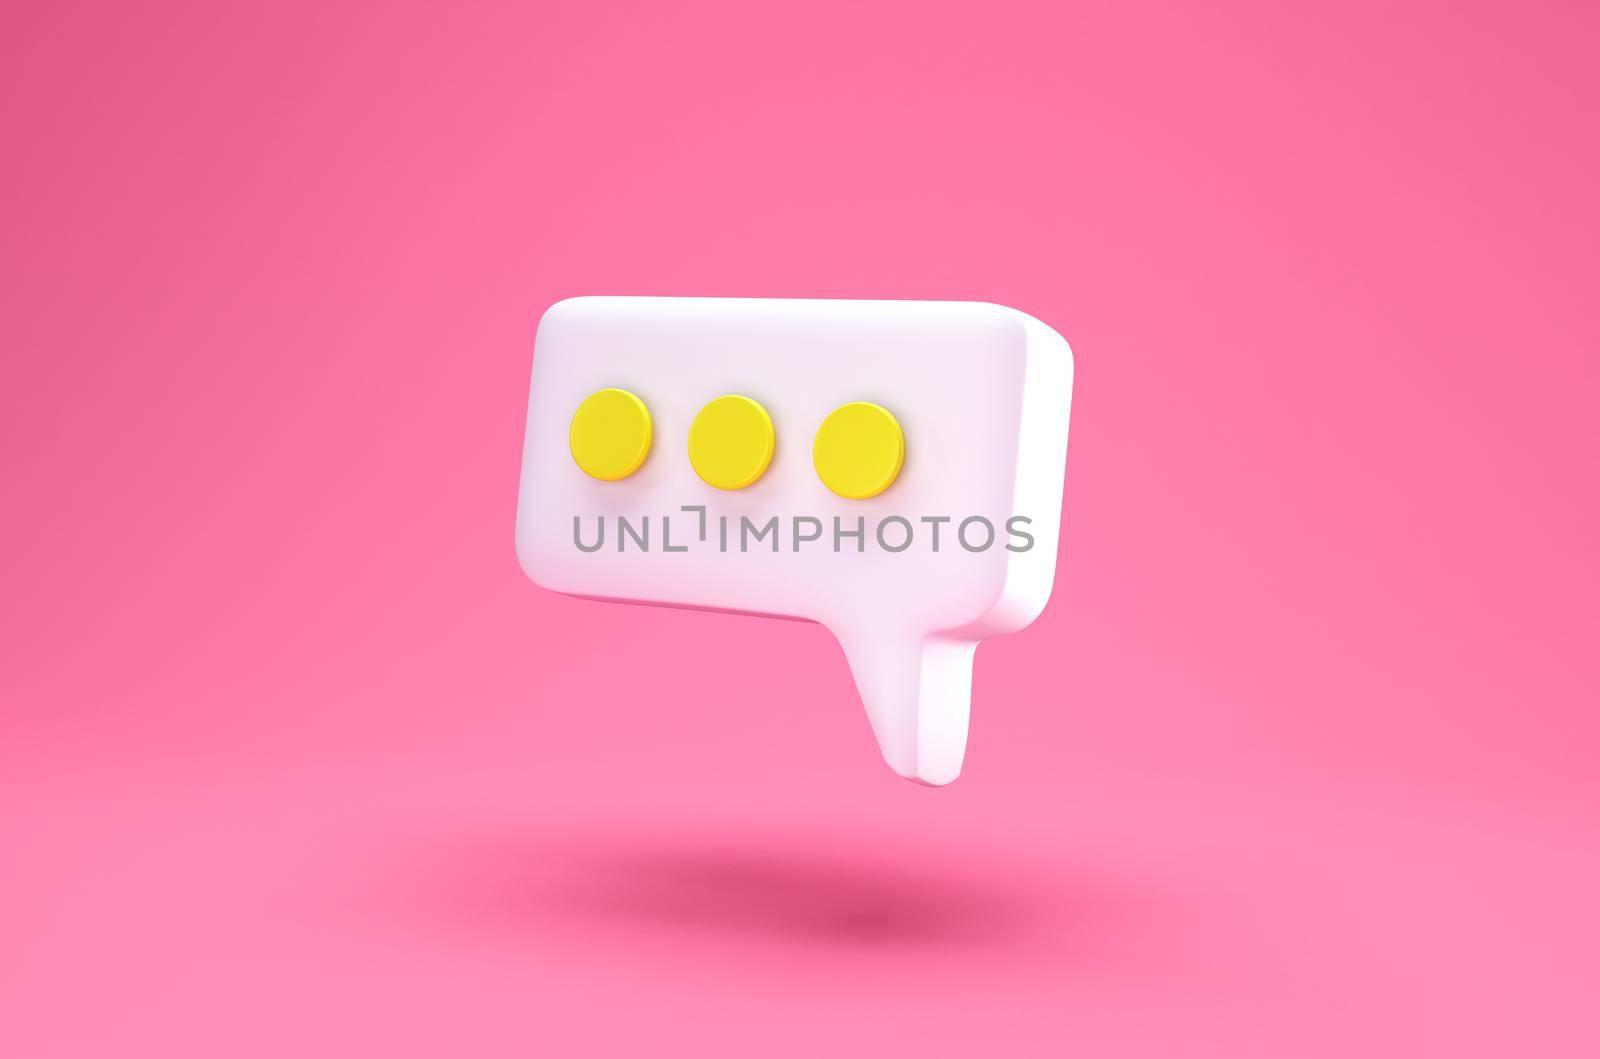 White Speech bubble chat icon isolated on pink background. Message creative concept with copy space for text. Communication or comment chat symbol. Minimalism concept. 3d illustration 3D render by lunarts